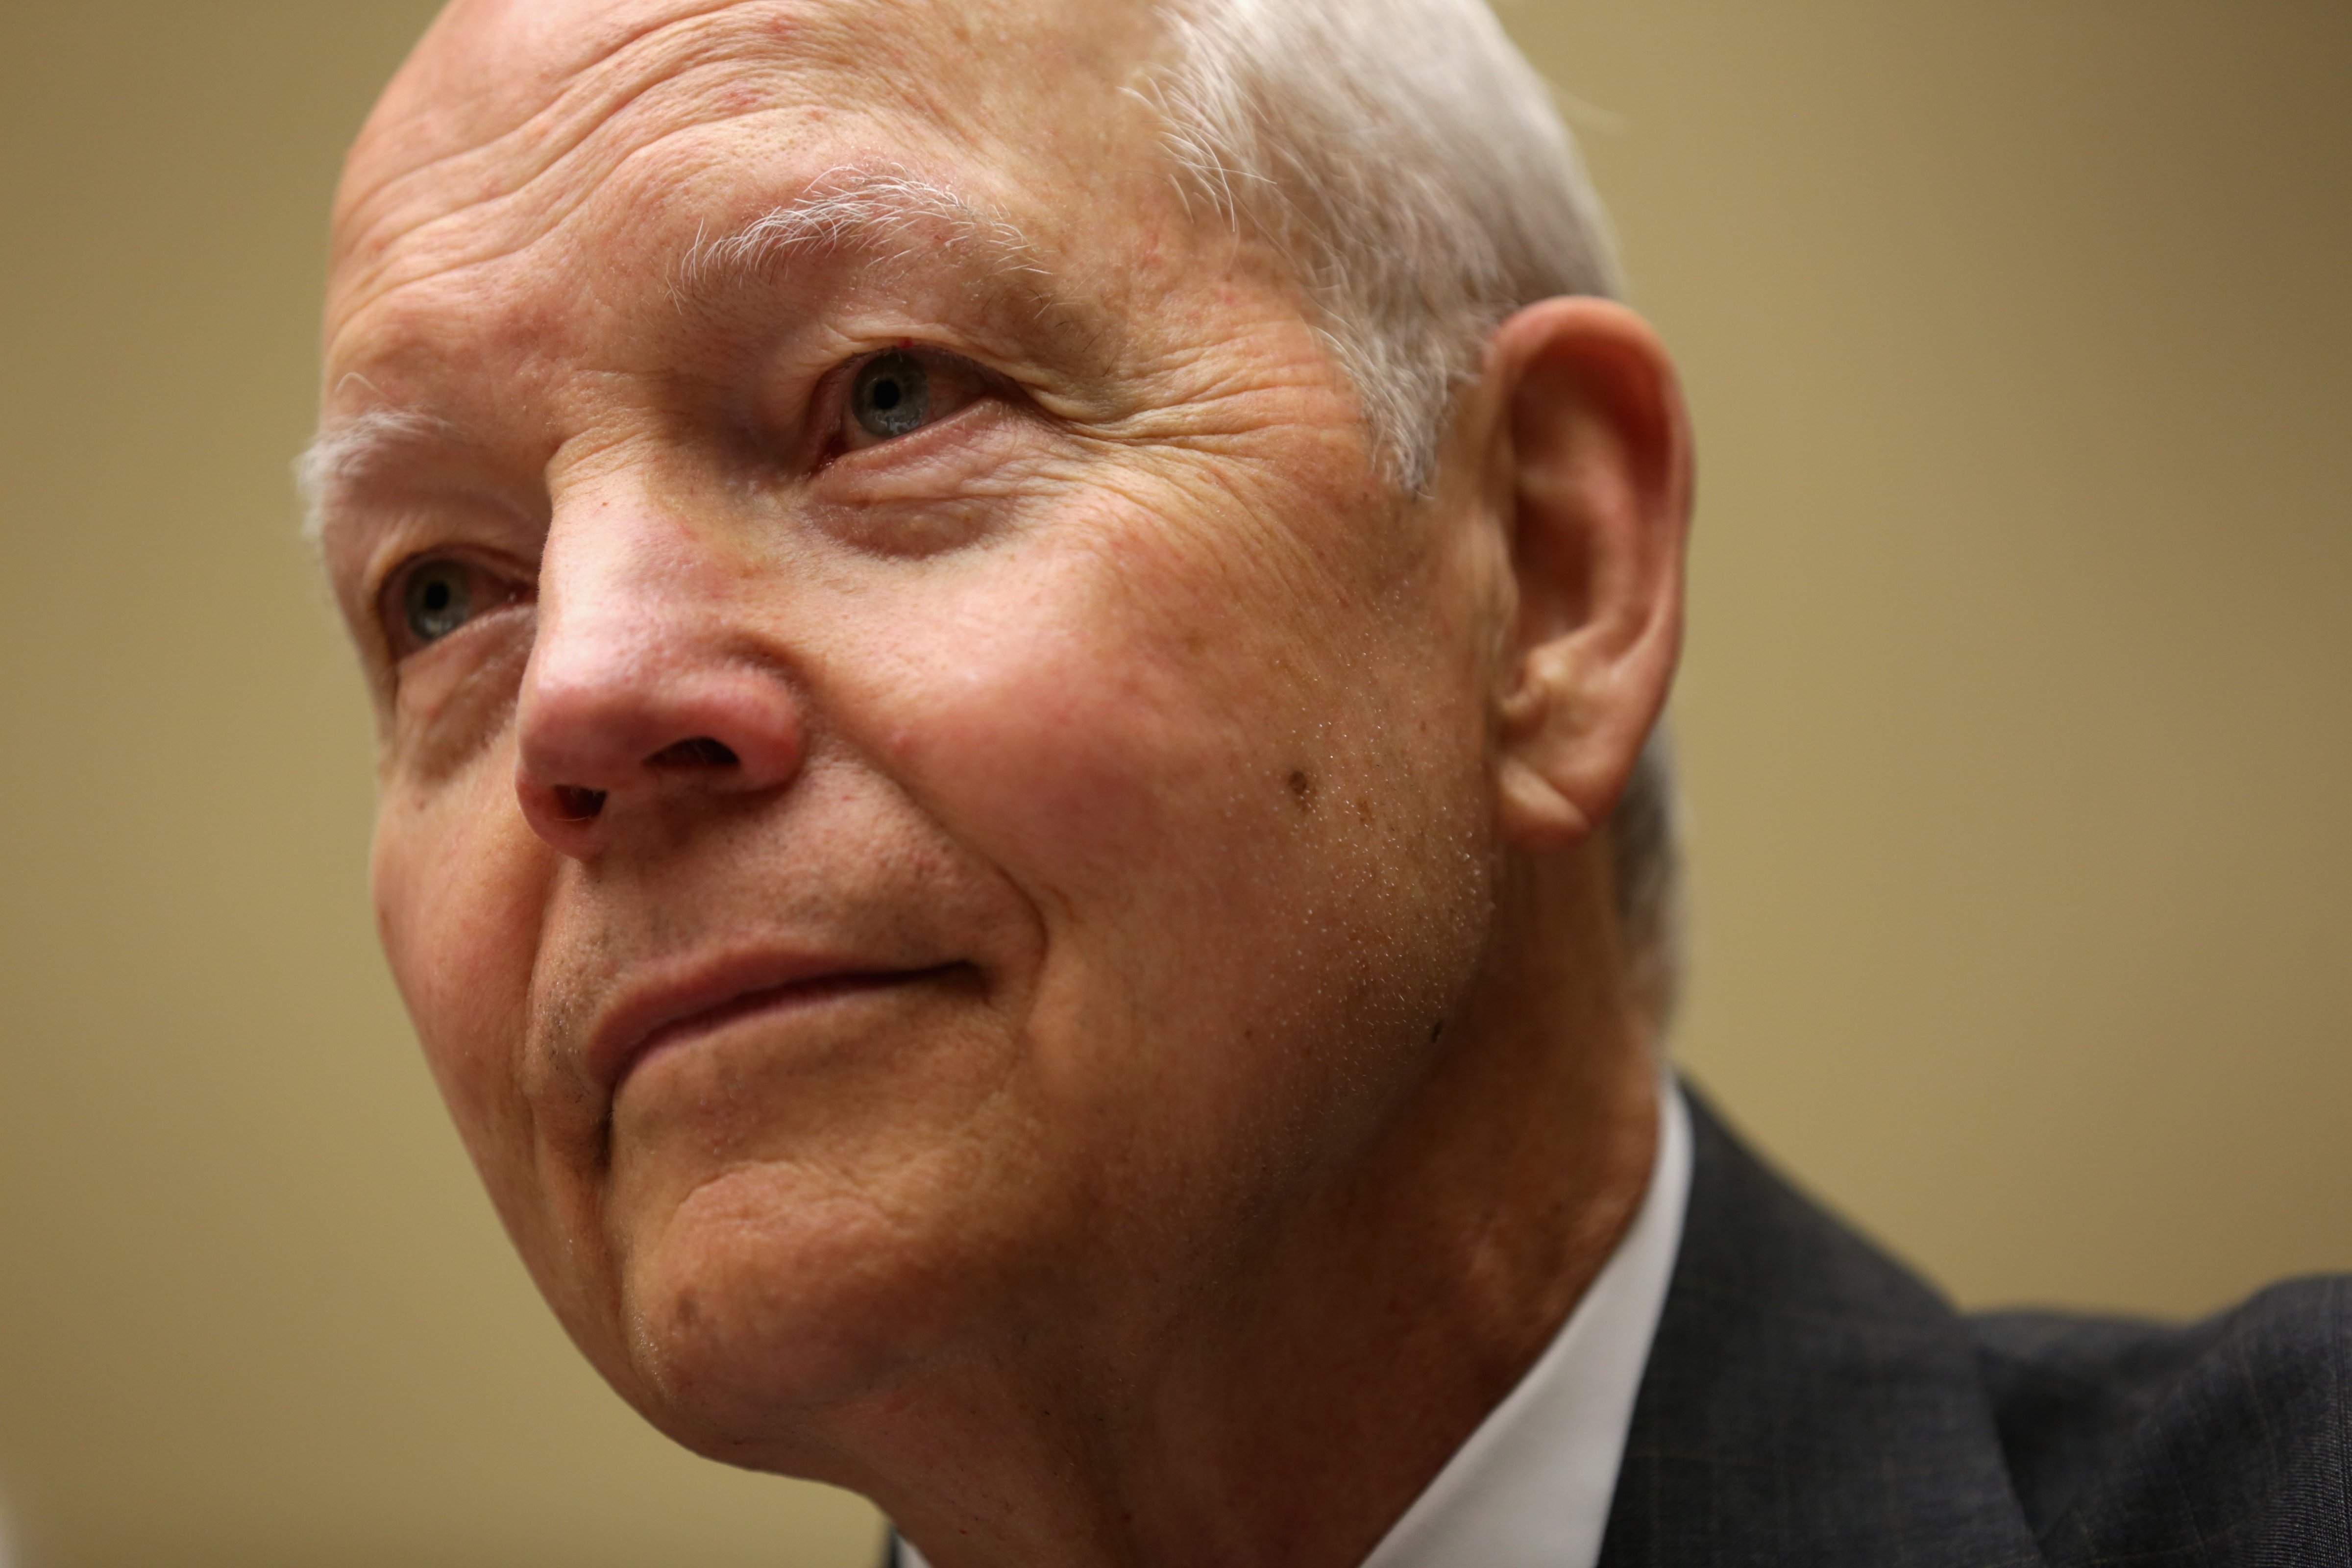 Internal Revenue Service Commissioner John Koskinen testifies during a hearing before the Government Operations Subcommittee of the House Oversight and Government Reform Committee July 9, 2014 on Capitol Hill in Washington, D.C. (Alex Wong—Getty Images)